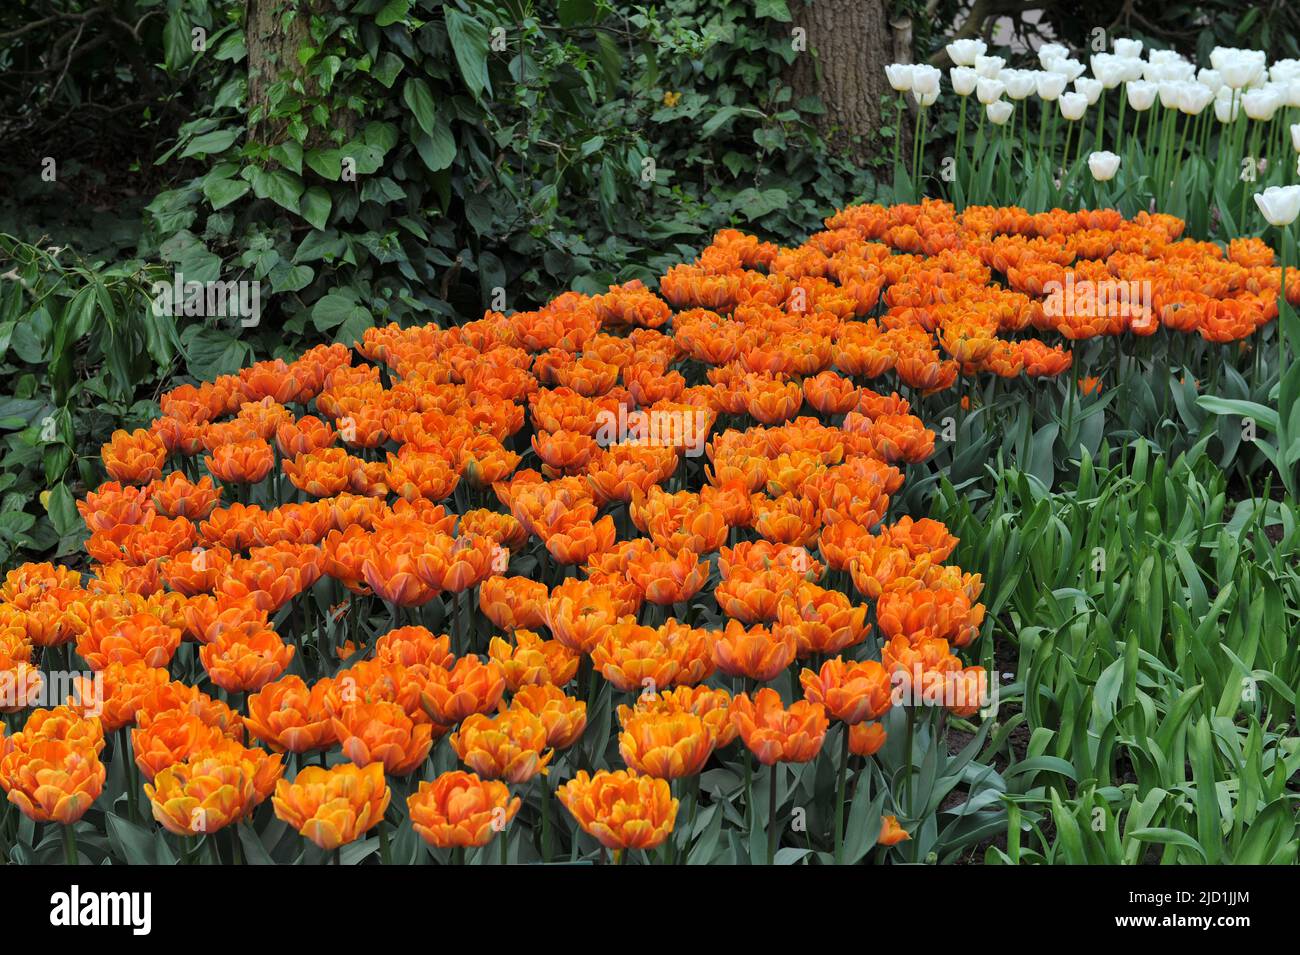 Peony-flowered Double Late tulips (Tulipa) Orange Princess bloom in a garden in April Stock Photo